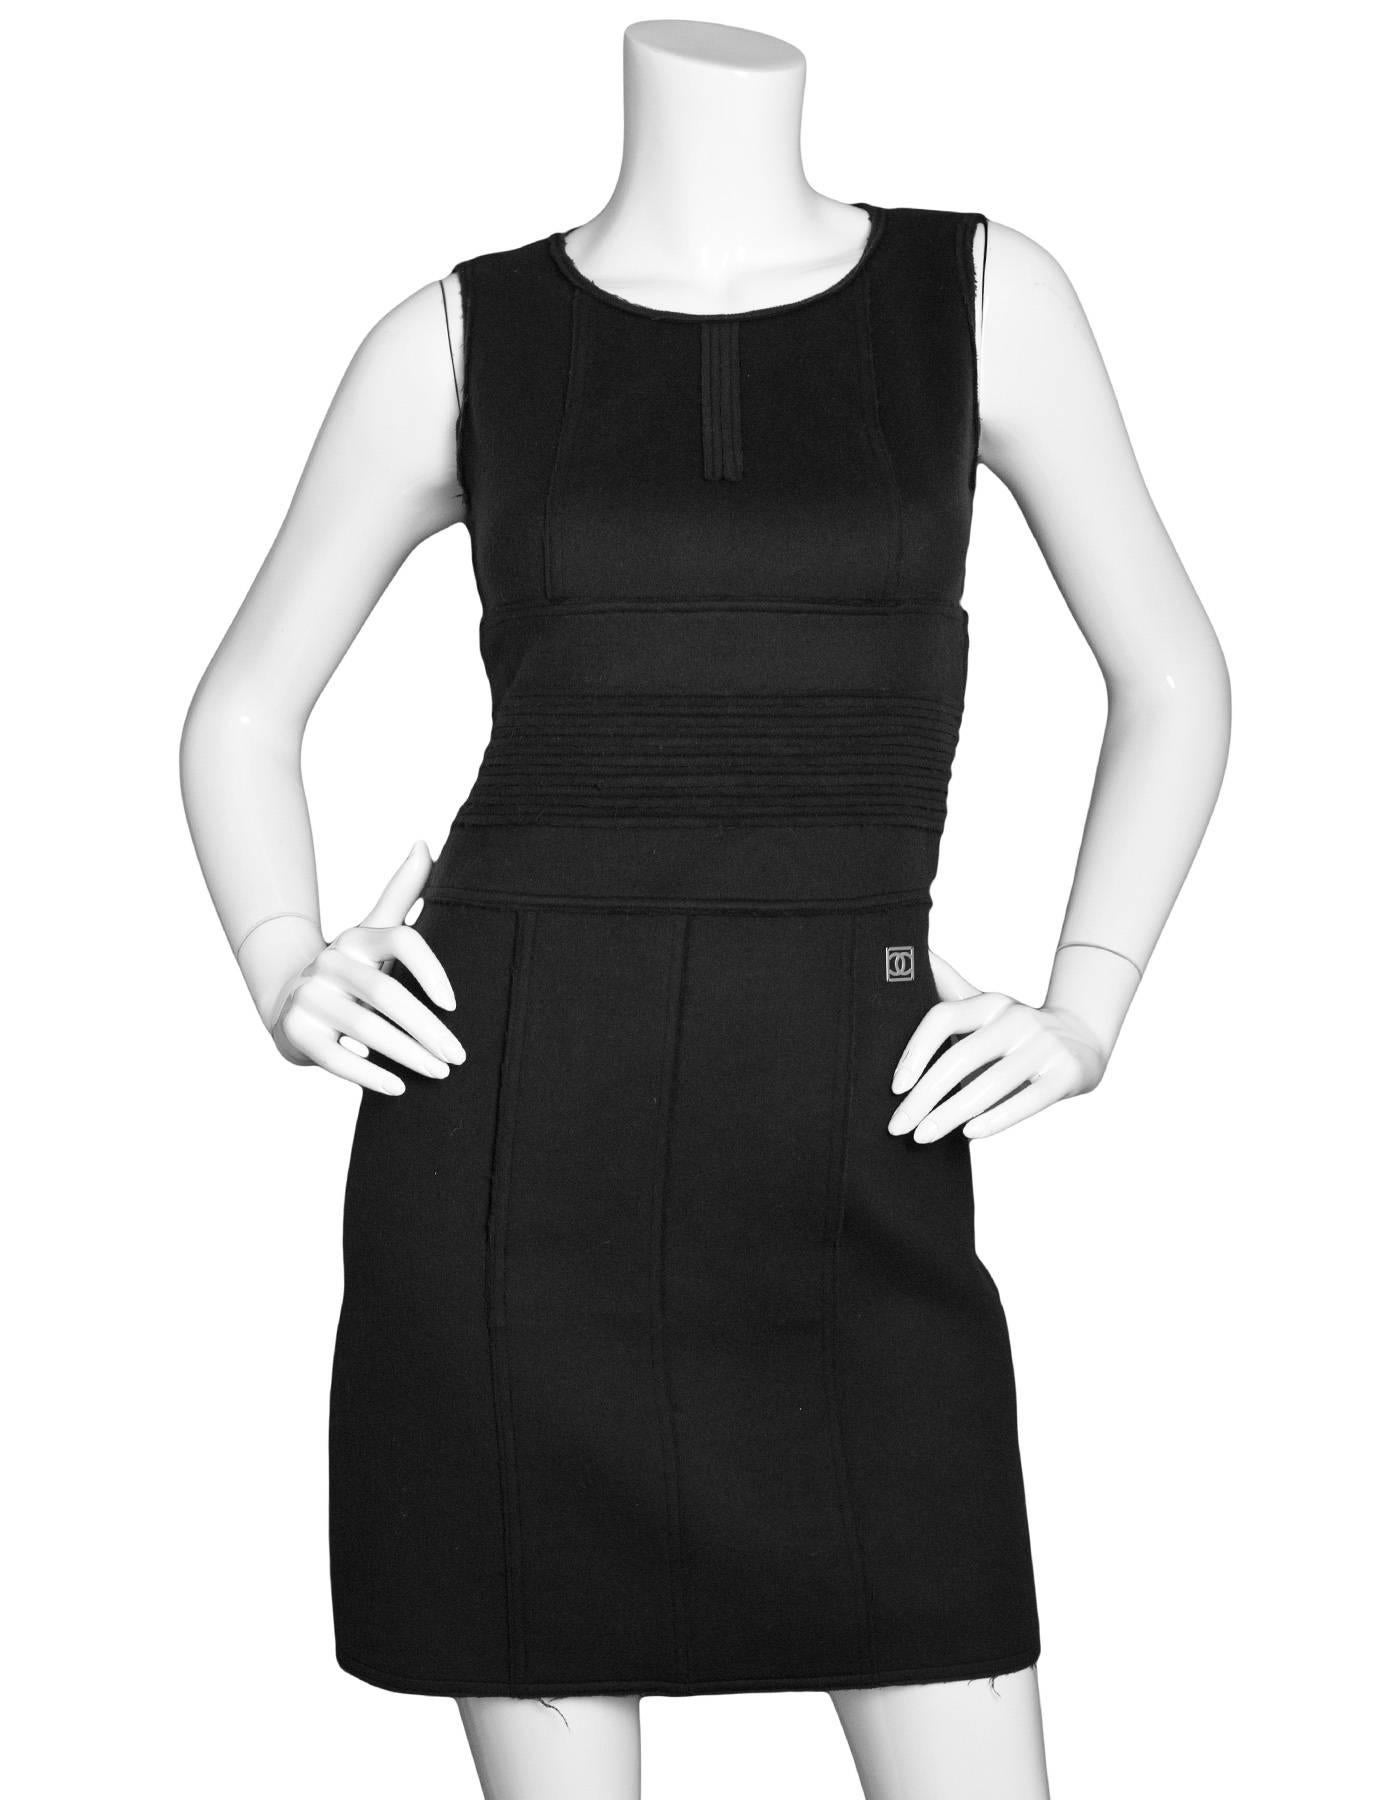 Chanel Sport Black Wool Sleeveless Dress Sz FR34

Made In: France
Color: Black
Composition: 100% Wool
Lining: none
Closure/Opening: Back zip closure
Exterior Pockets: None
Interior Pockets: None
Overall Condition: Excellent pre-owned condition,